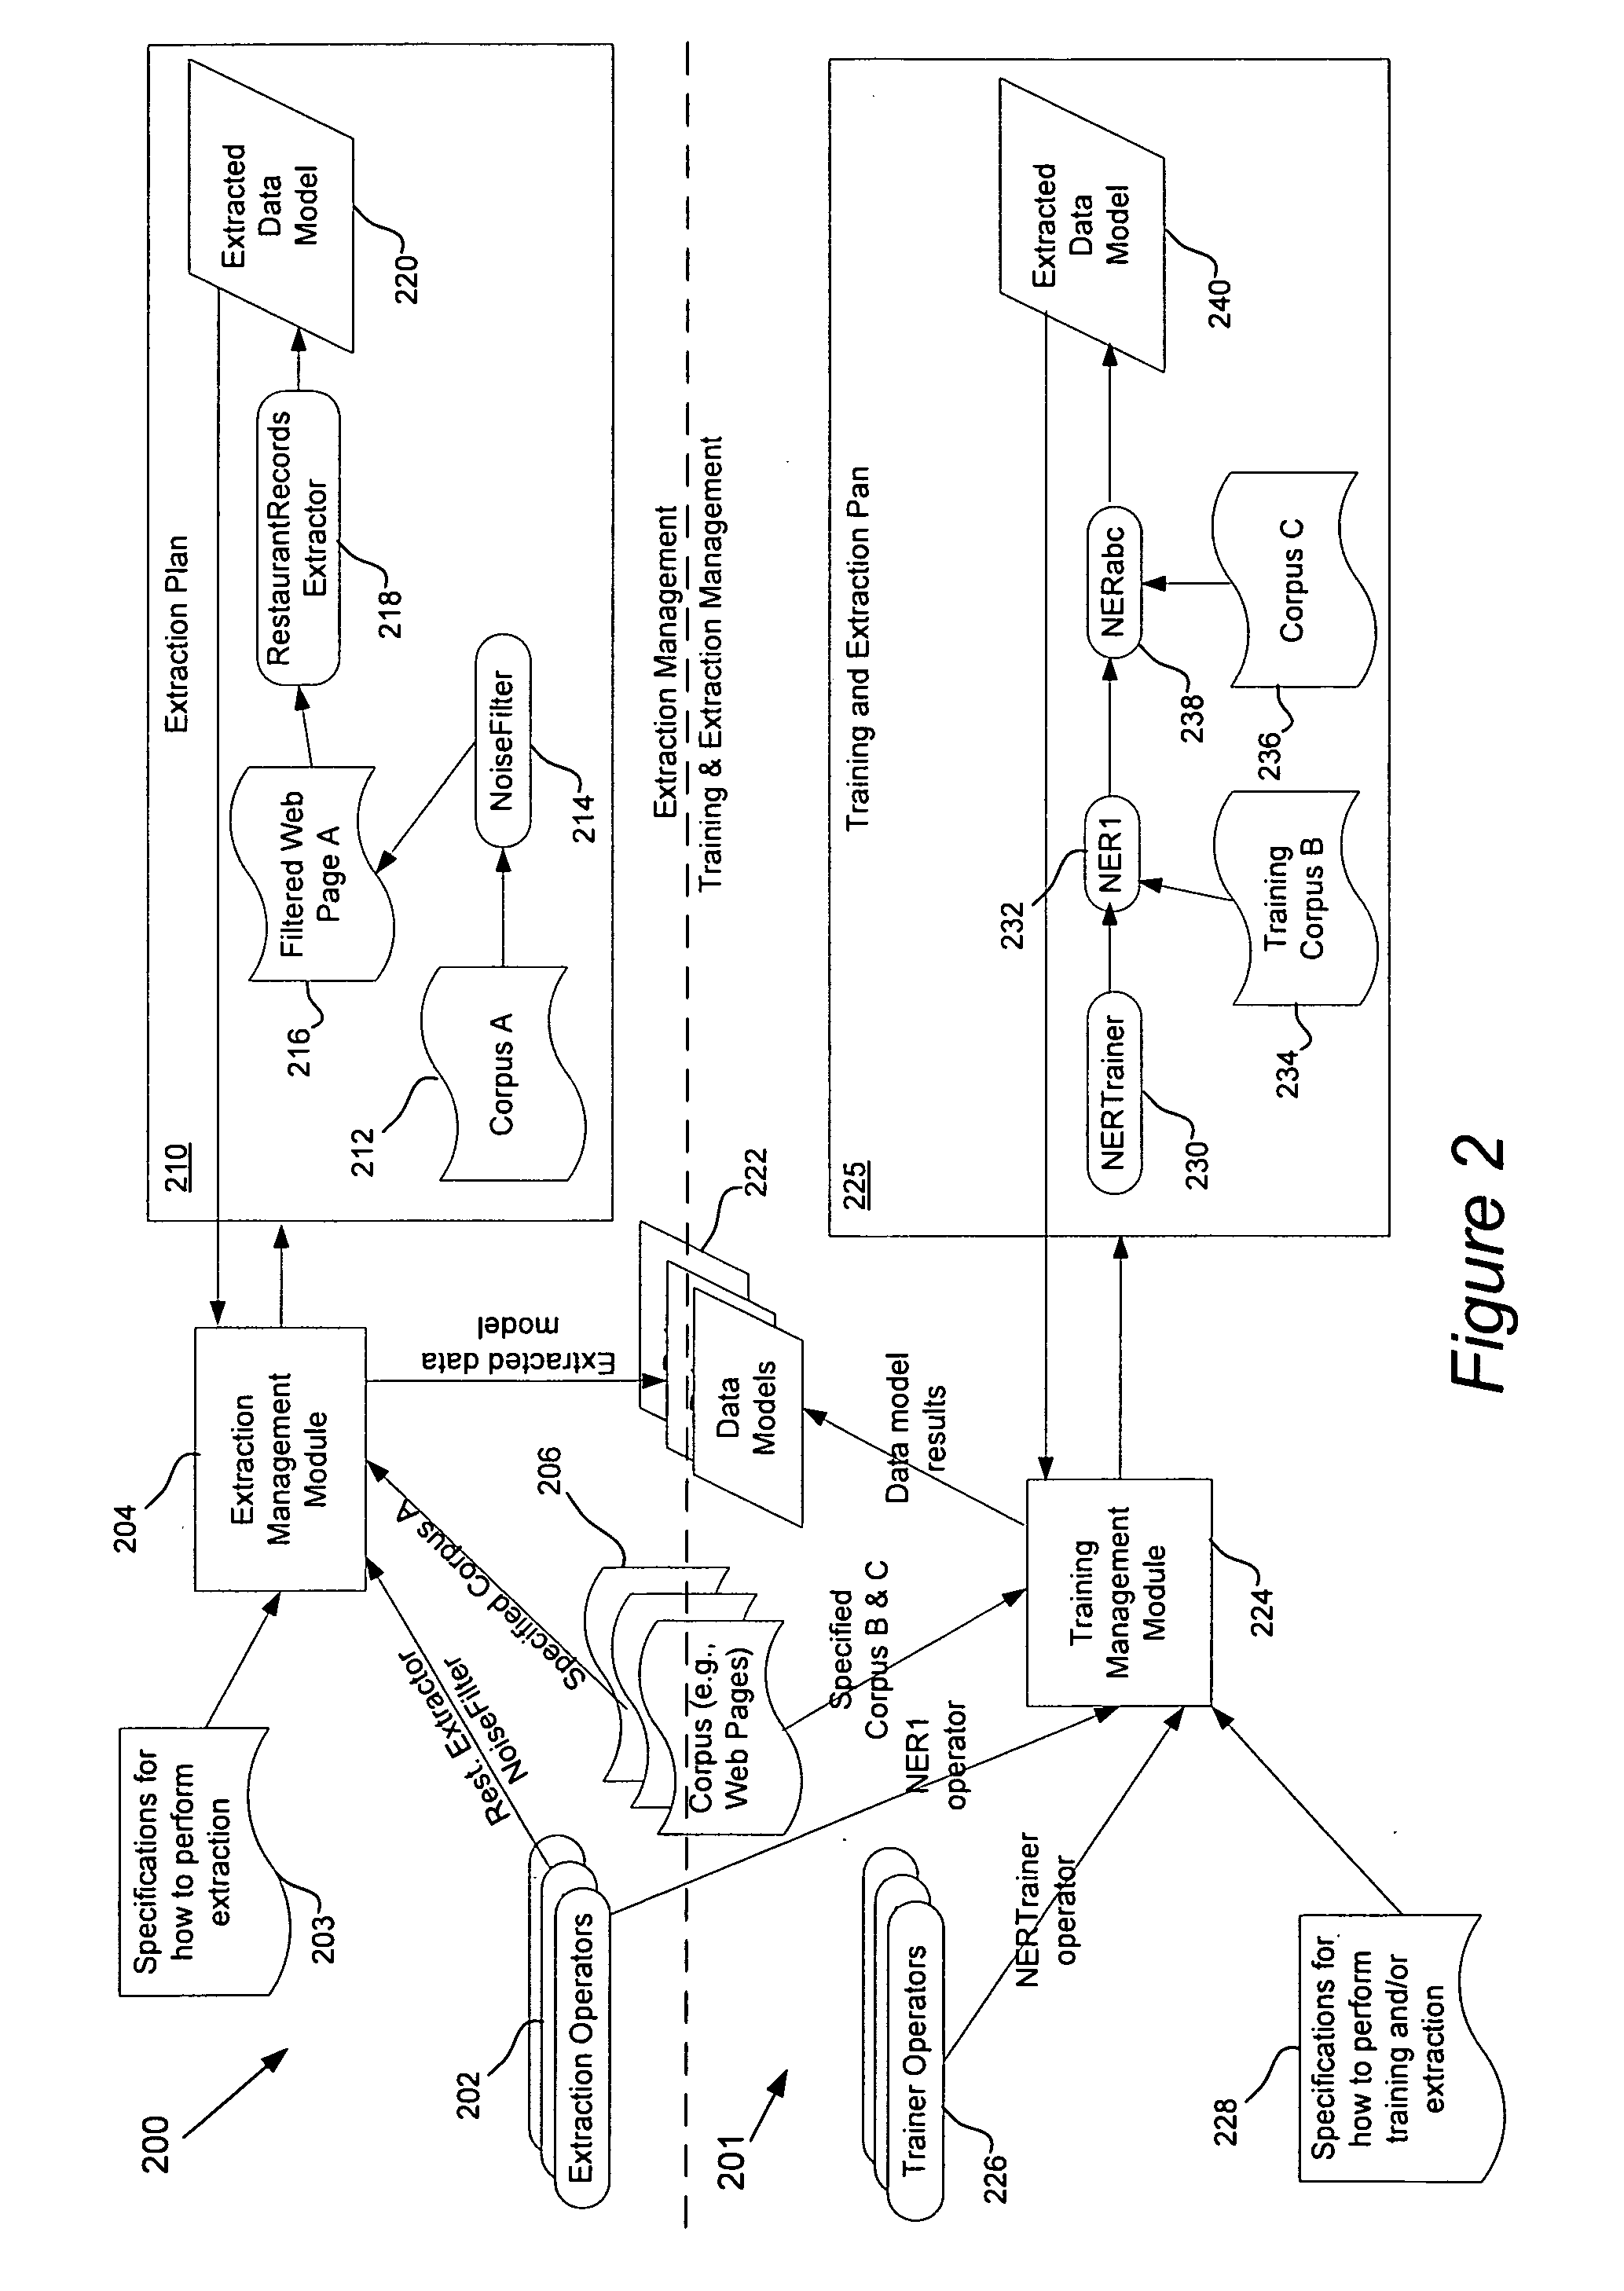 Apparatus and methods for operator training in information extraction